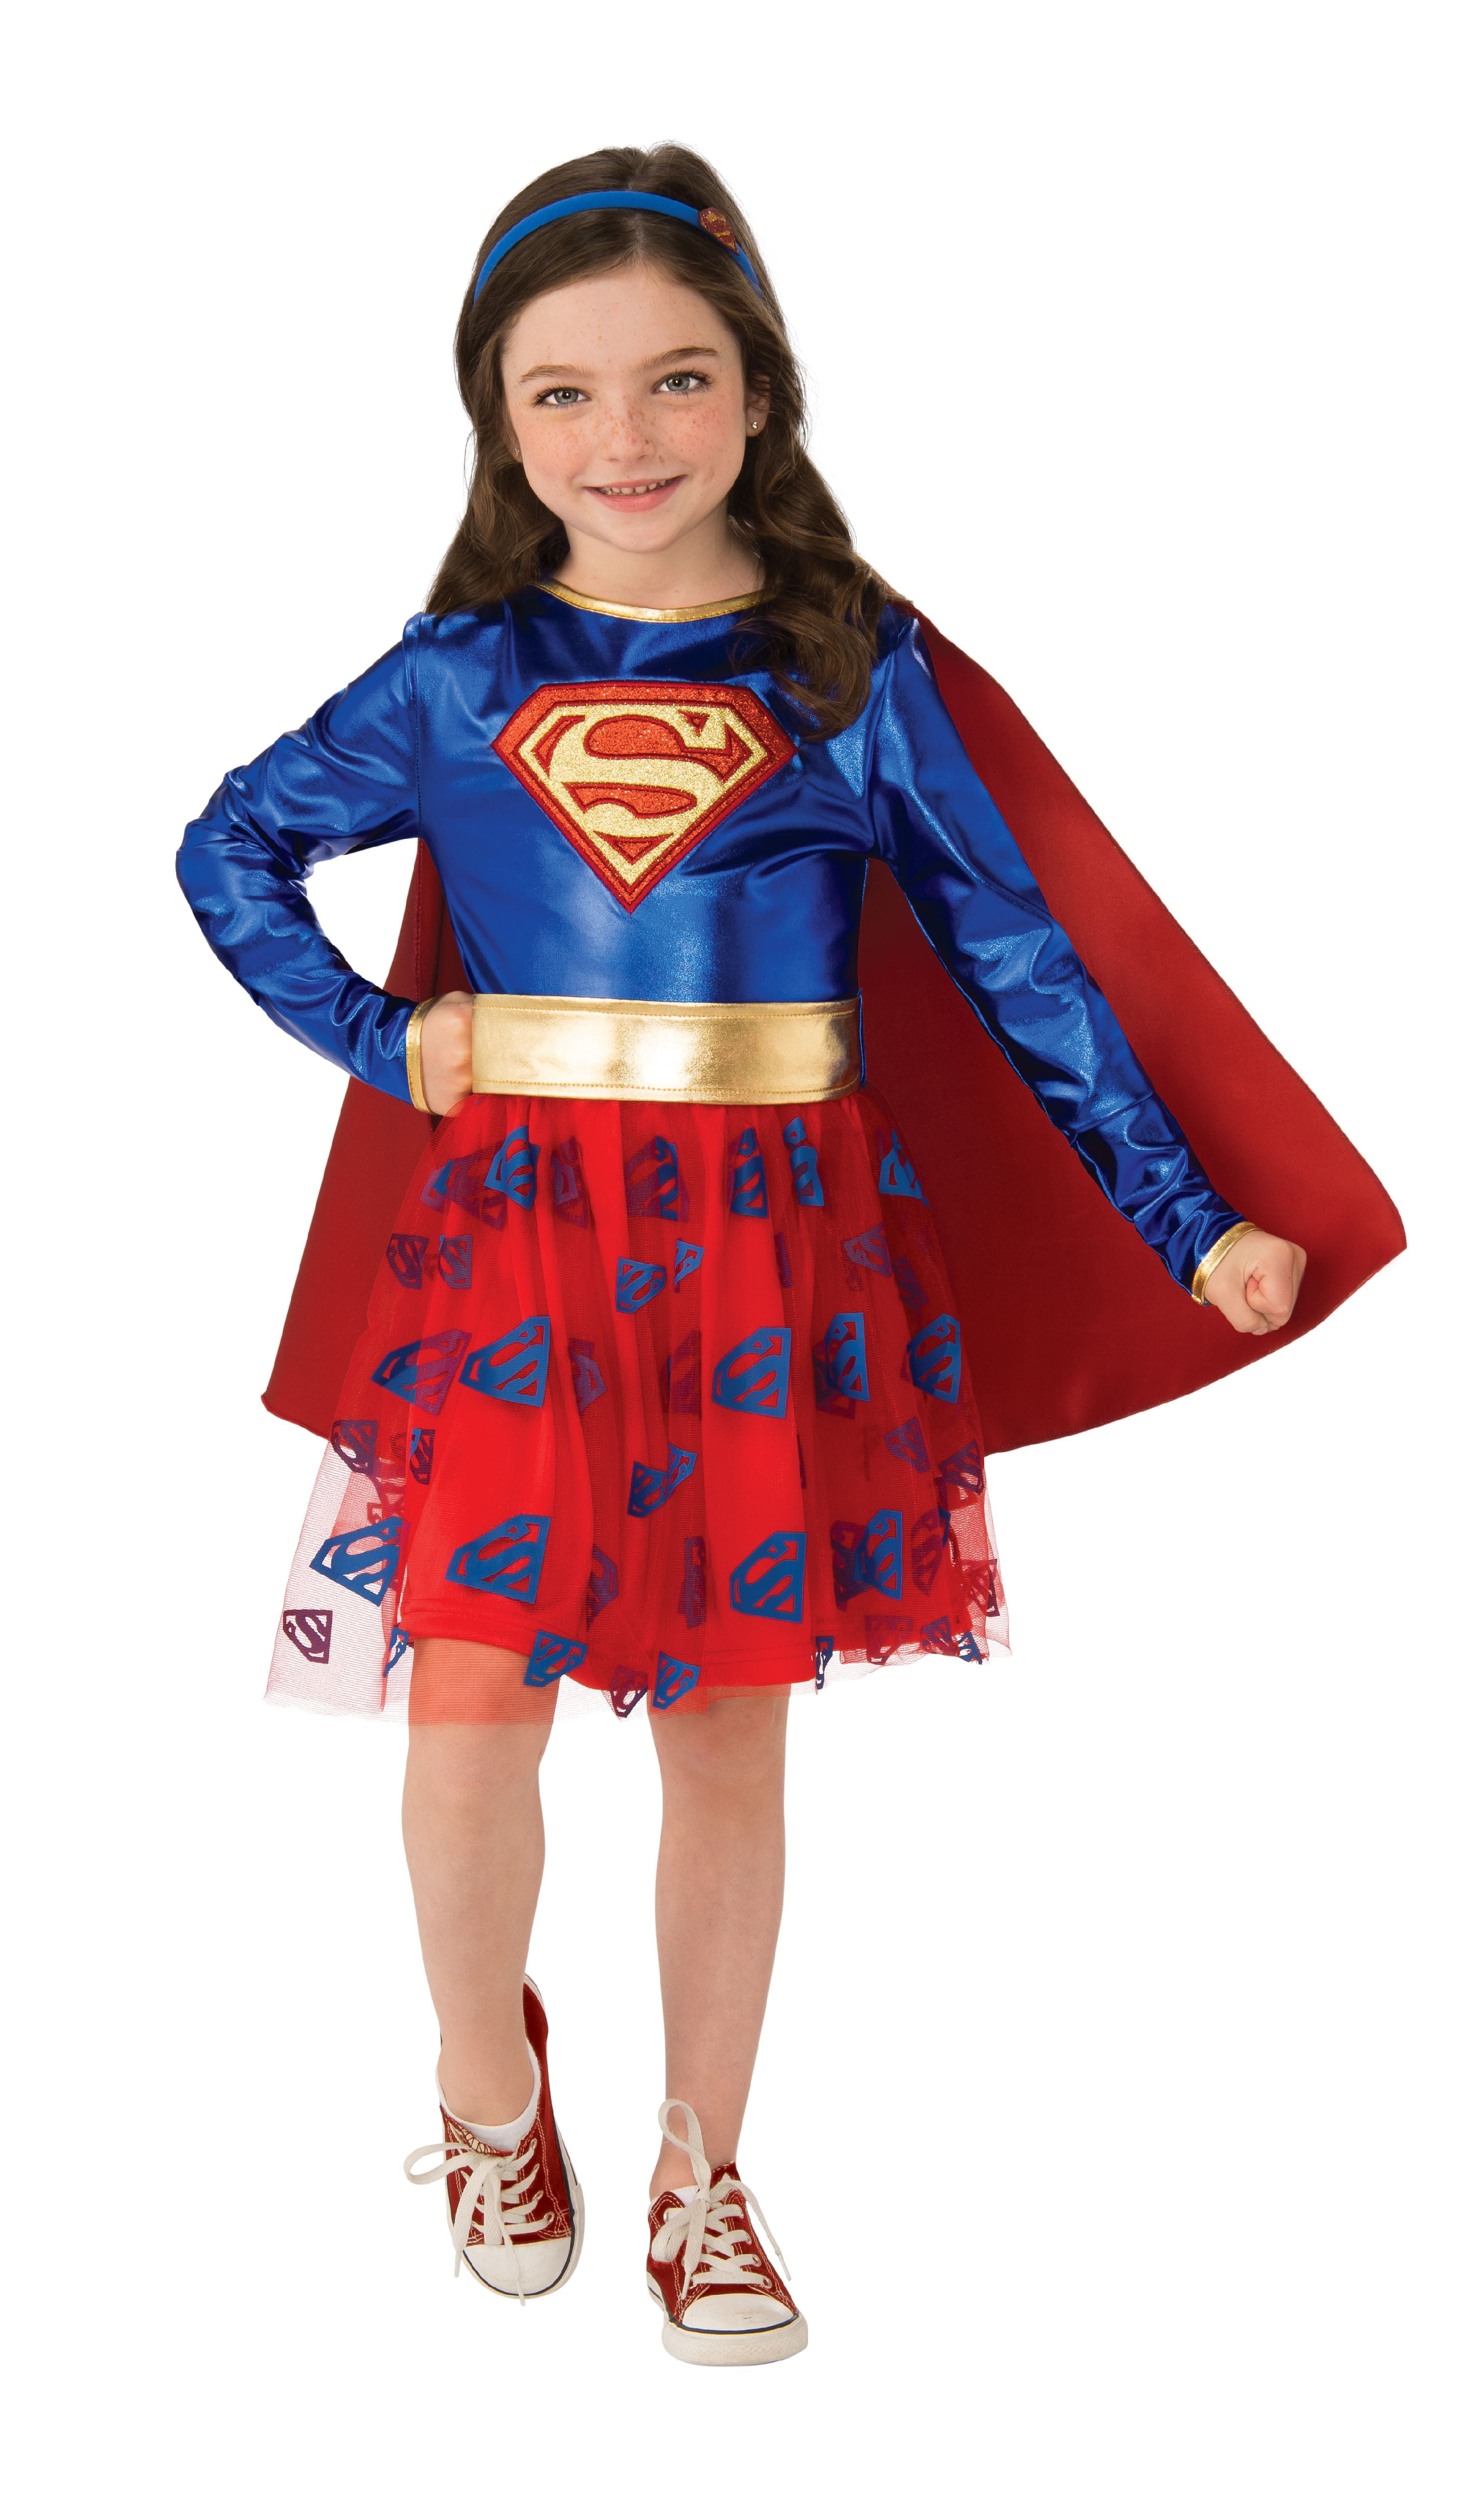 Details about   SUPER GIRL COSTUME Kids Medium US/CAN Size 8-10 5 to 7 years SUPERGIRL COSTUME 